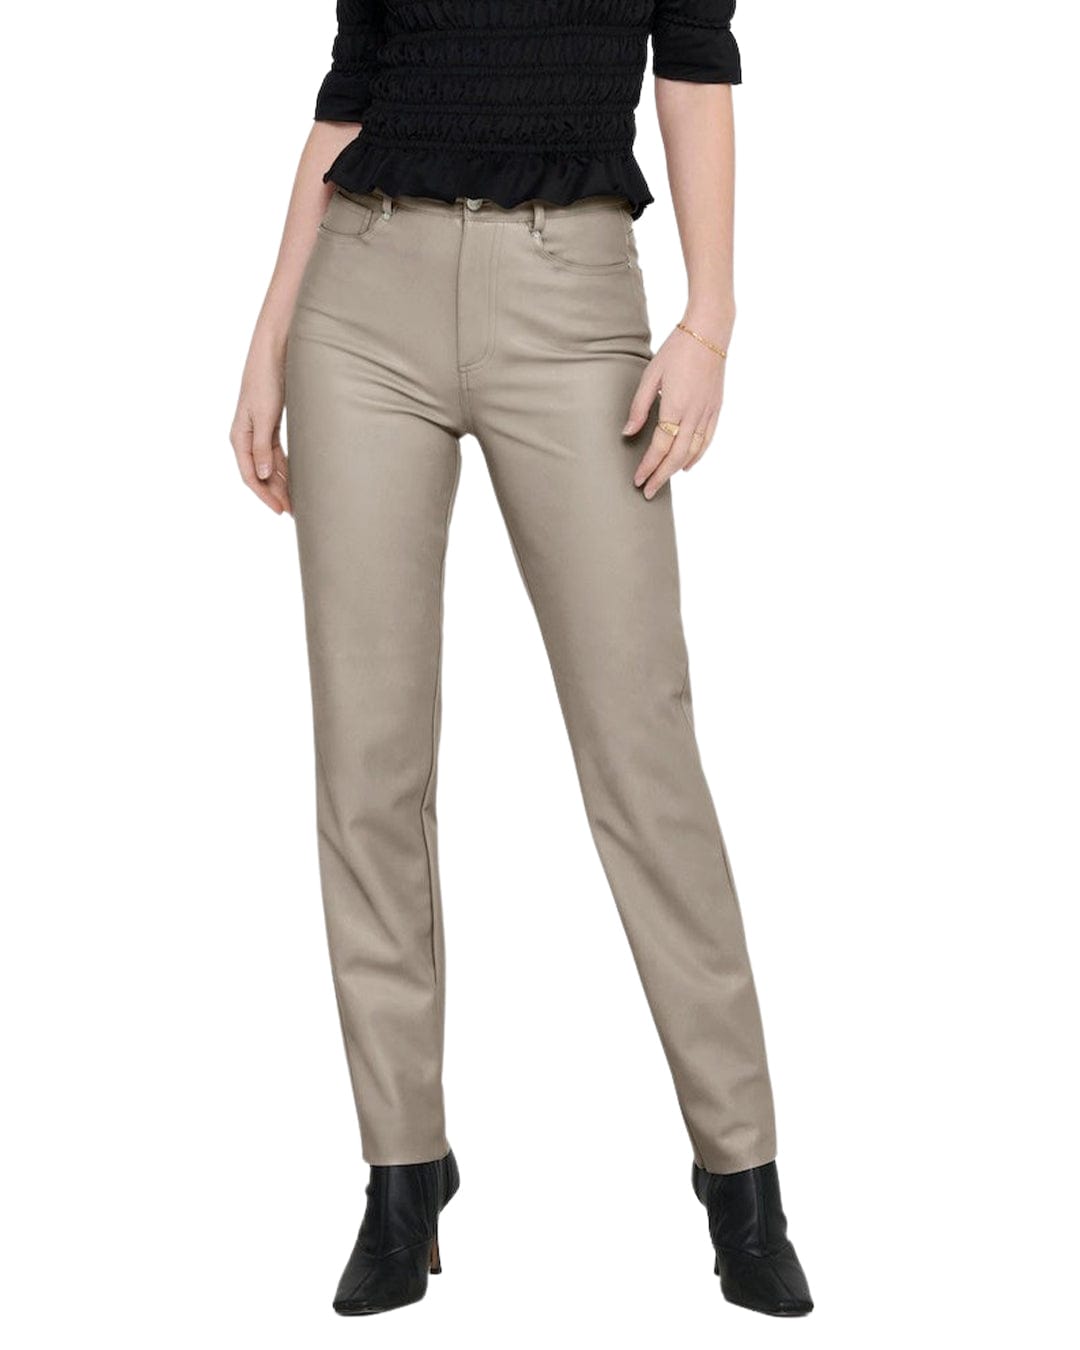 Only Trousers Only Emily Grey Faux Leather Trousers